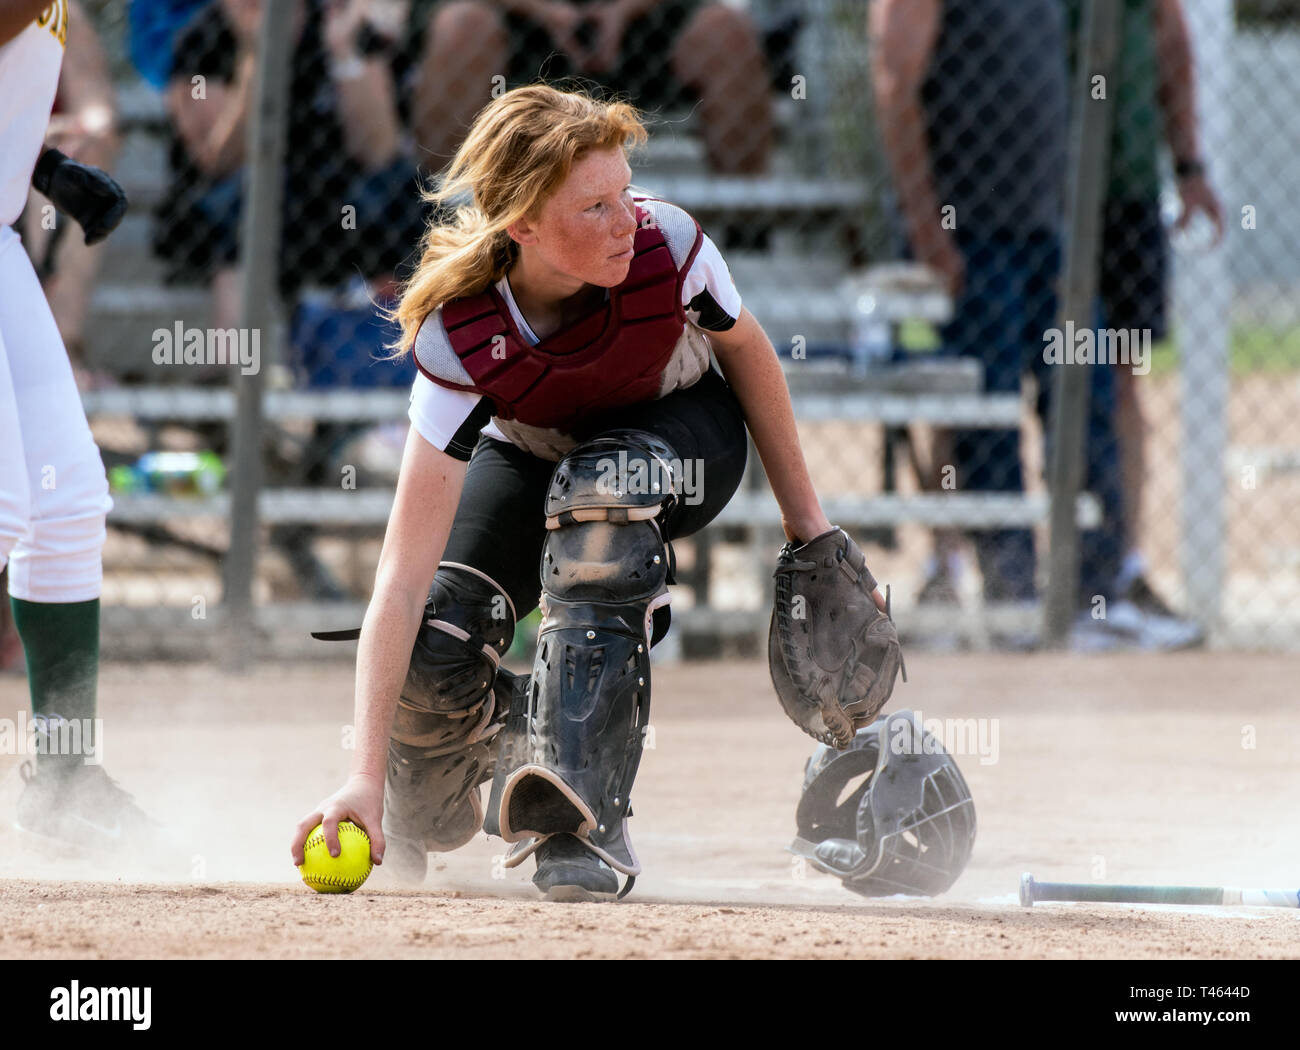 Skilled softbaall catcher with red hair and protective gear gaining a grip on the loose ball while looking up field. Stock Photo